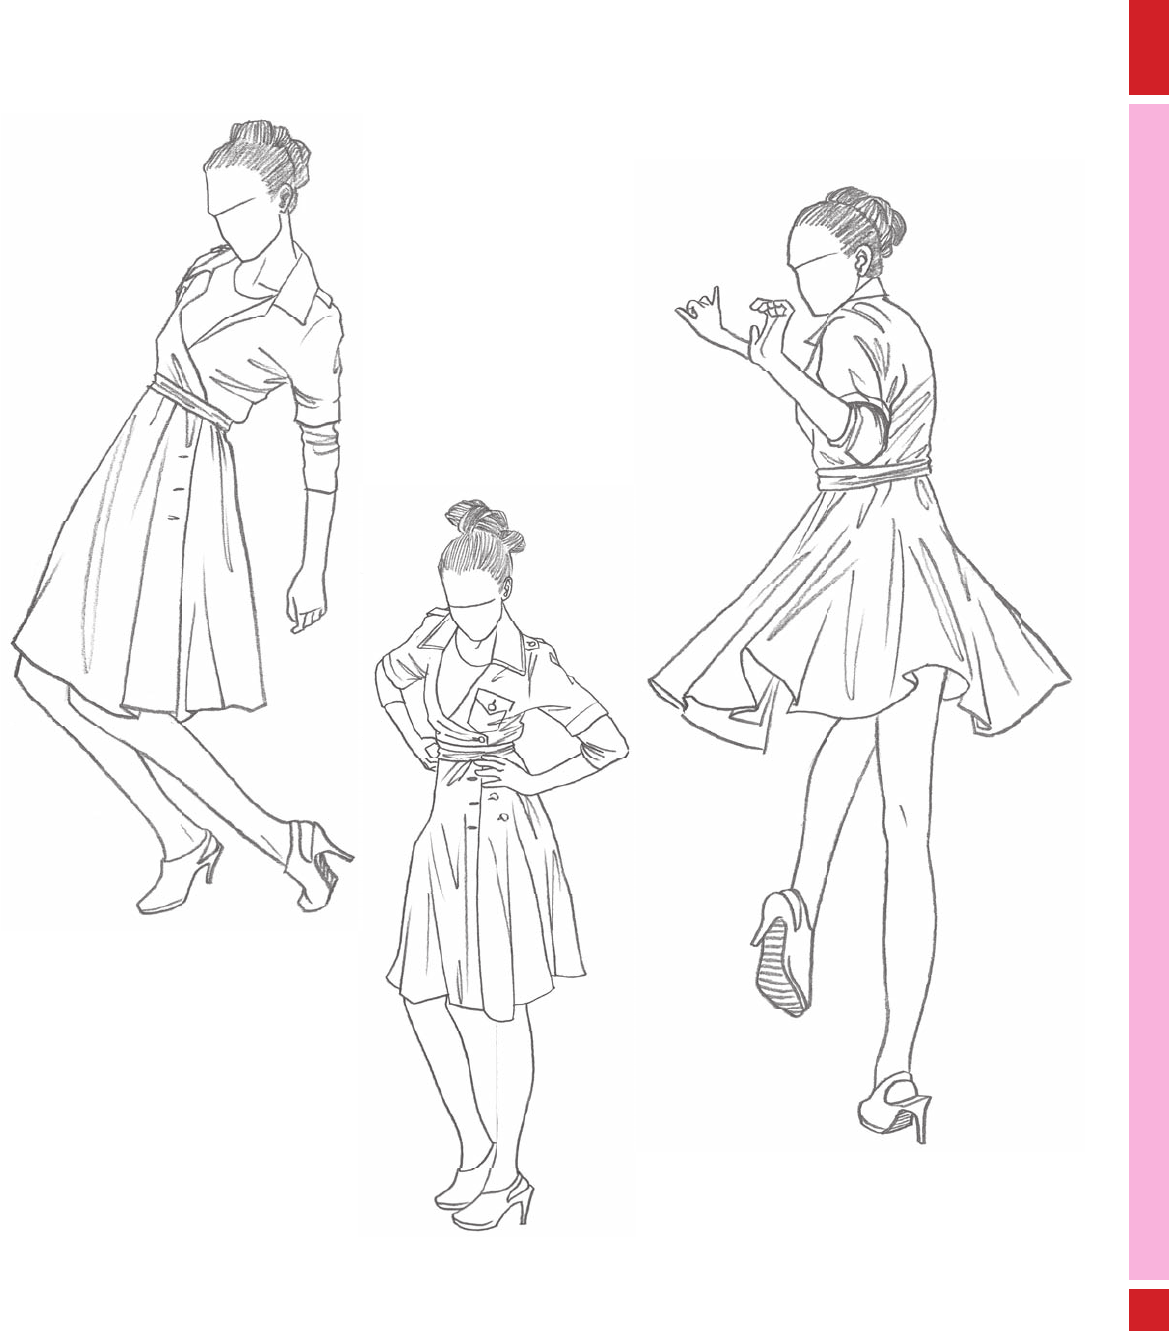 1,000 Fashion Poses: A complete reference guide to posing for